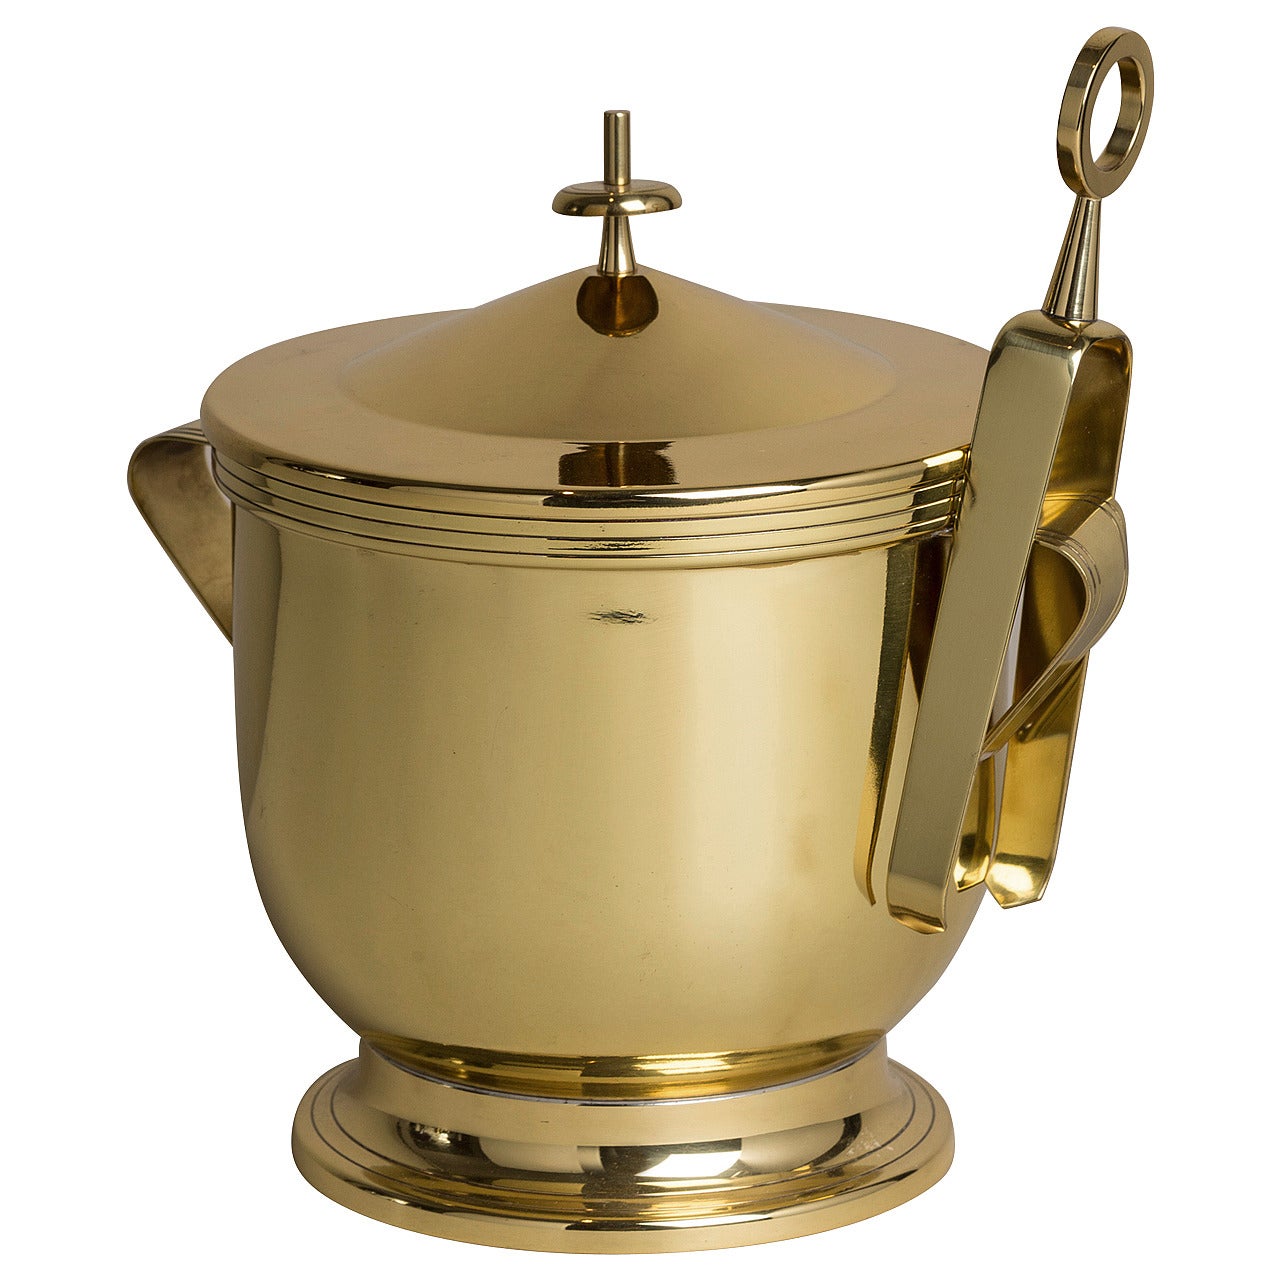 A Brass Ice Bucket and Tongs designed by Parzinger 1950s stamped